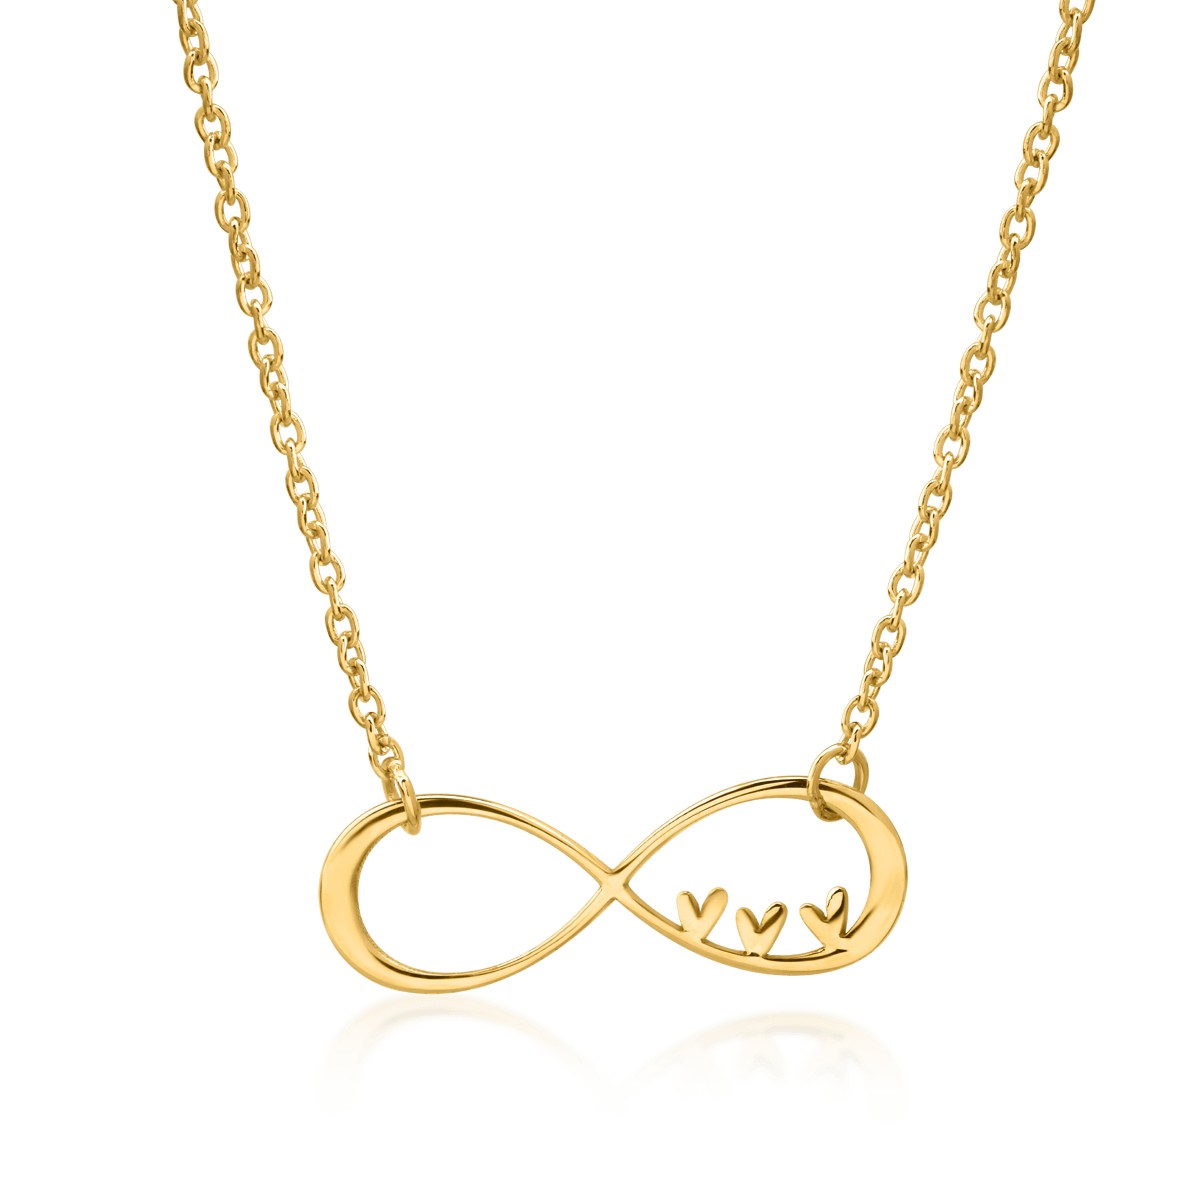 14K yellow gold necklace with infinity charm